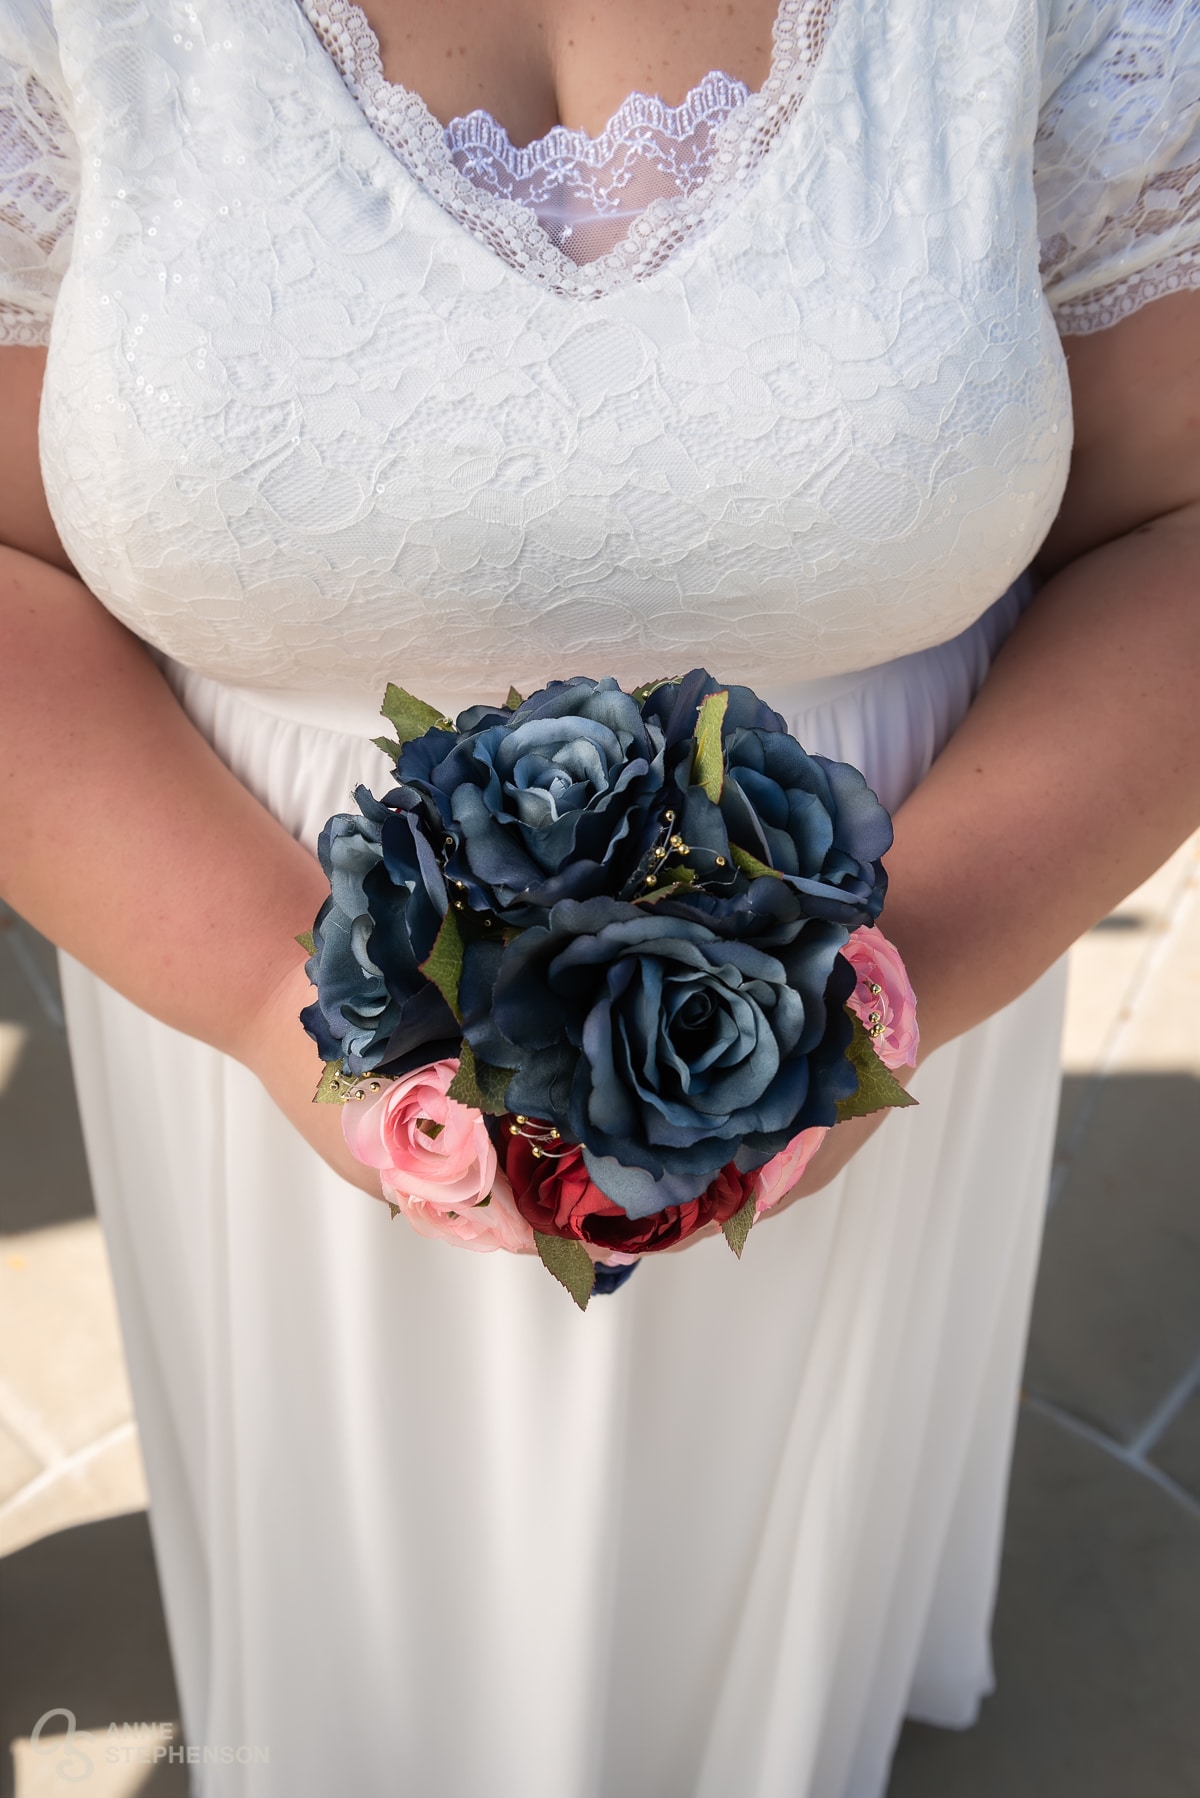 Close up of the bride's bouquet with navy, pink, and red roses.